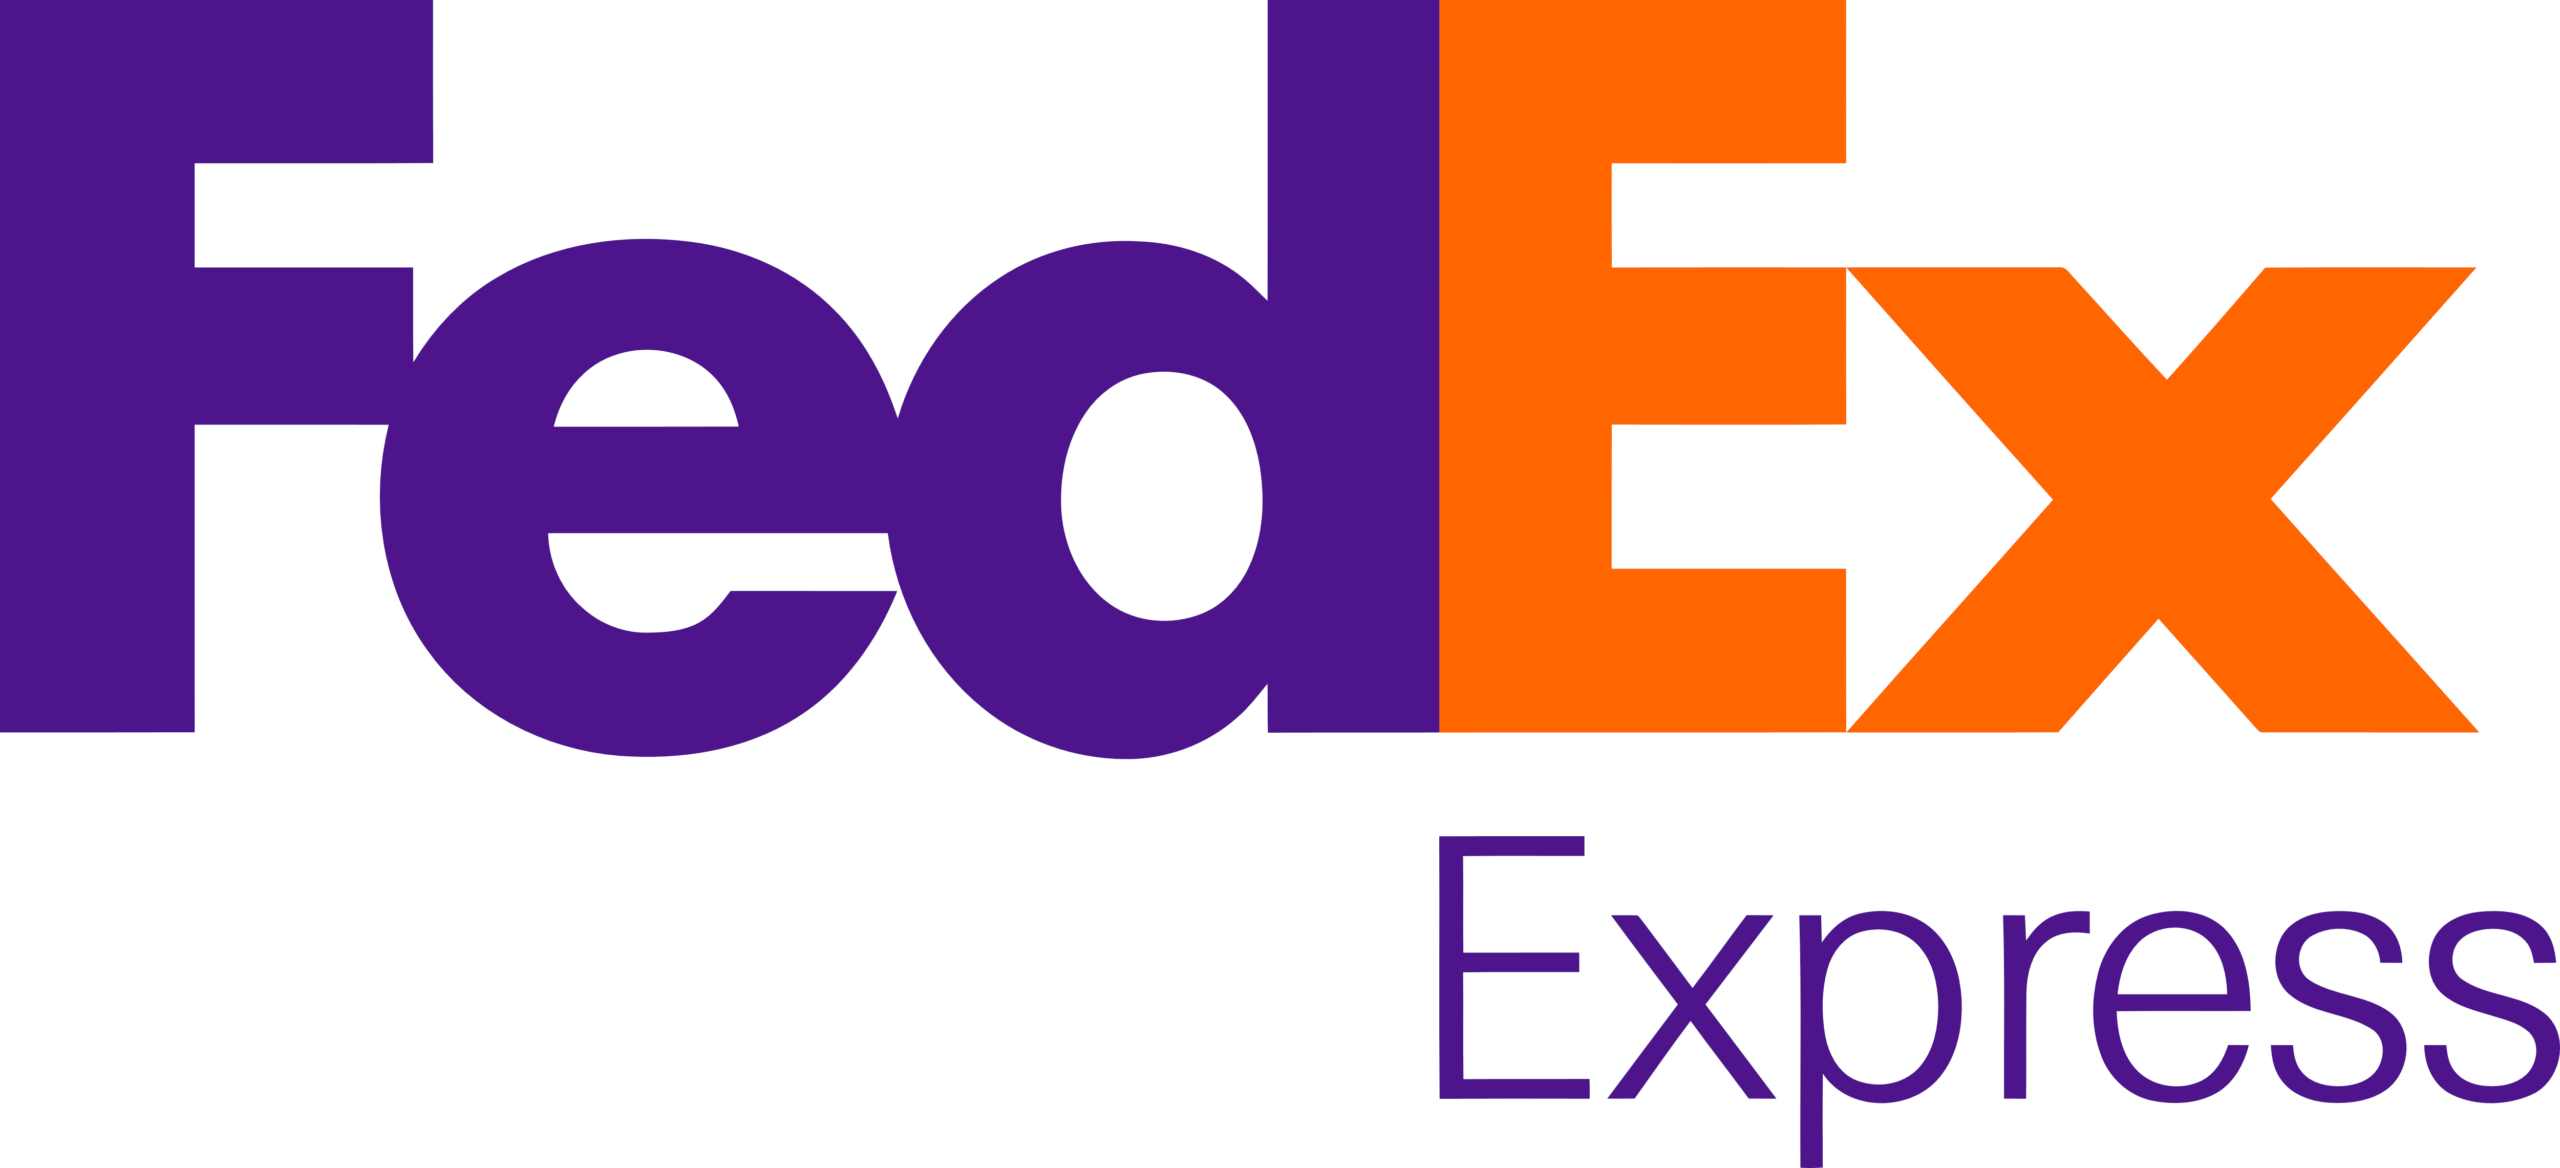 FedEx Express is hiring from Chennai Business School-Best MBA colleges in Tamilnadu